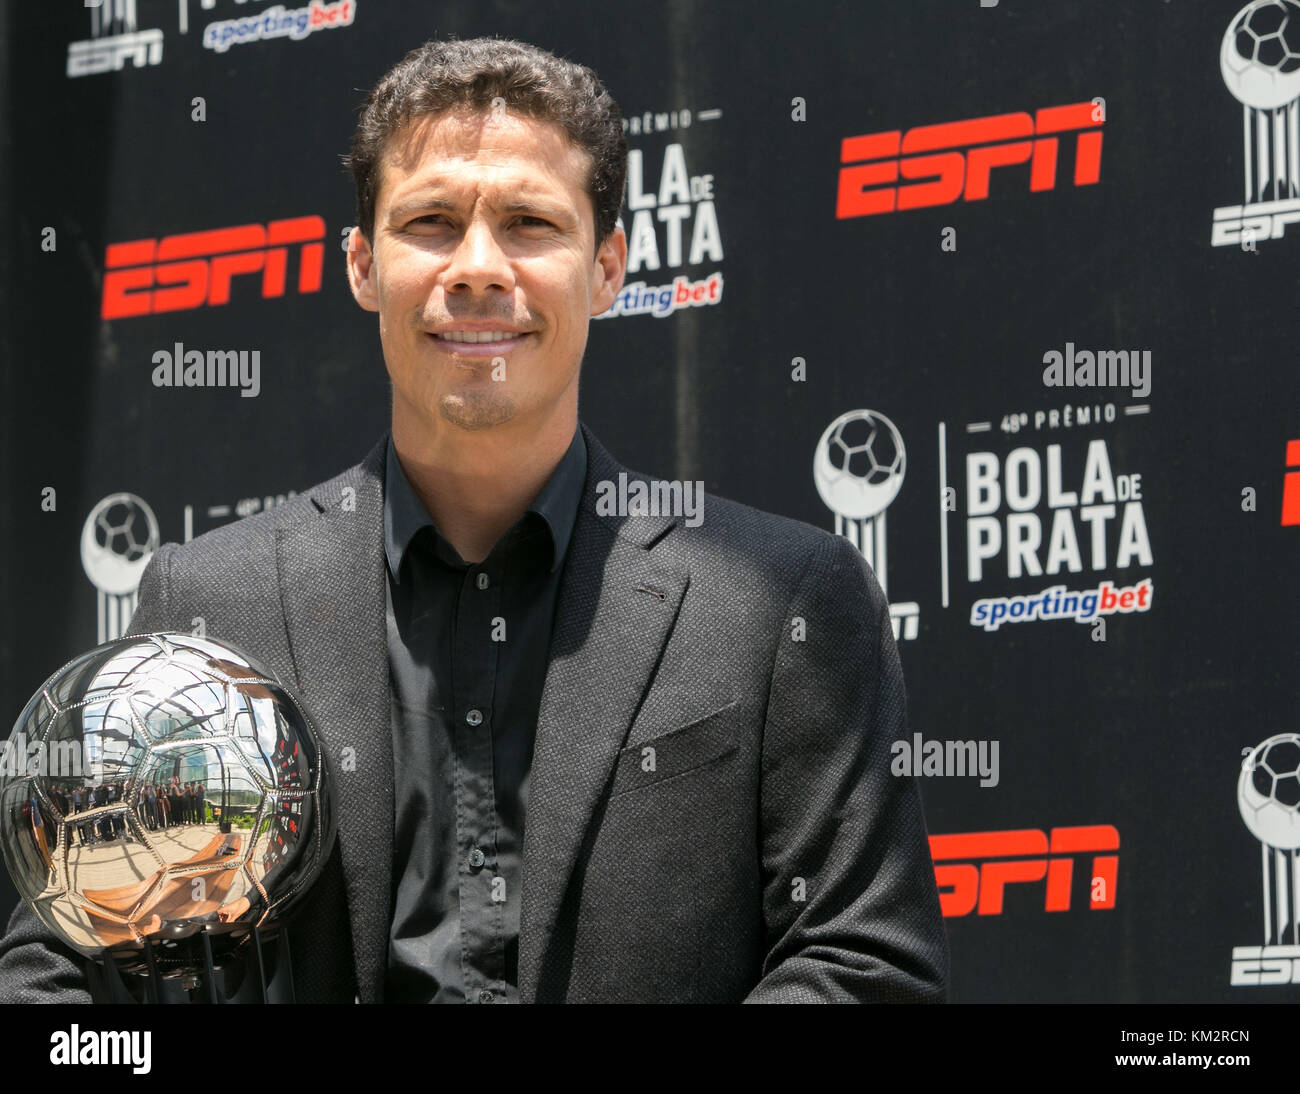 Sao Paulo, Brazil. 4th Dec, 2017. Silver Ball Award arrives at its 48th edition this Monday (04) in SP and aims to reward the best athletes of 2017. In the spotlight Hernanes do São Paulo. Credit: Foto Arena LTDA/Alamy Live News Stock Photo